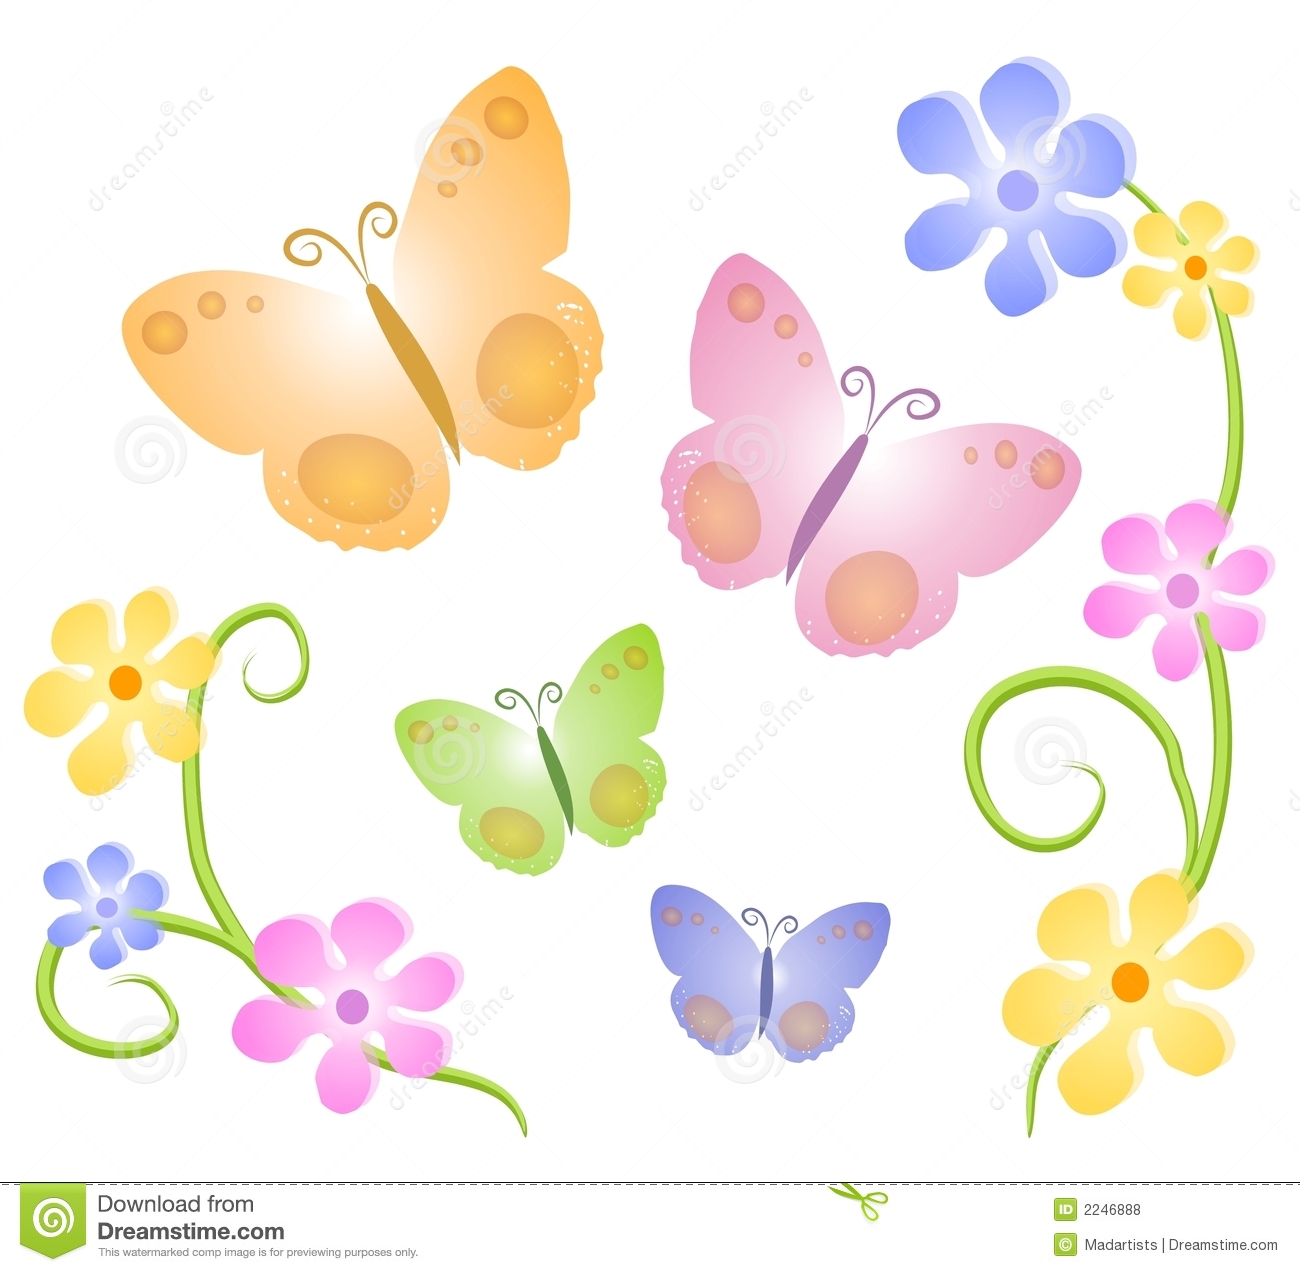 Butterflies Flowers Clip Art 2 Royalty Free Stock Photos   Image